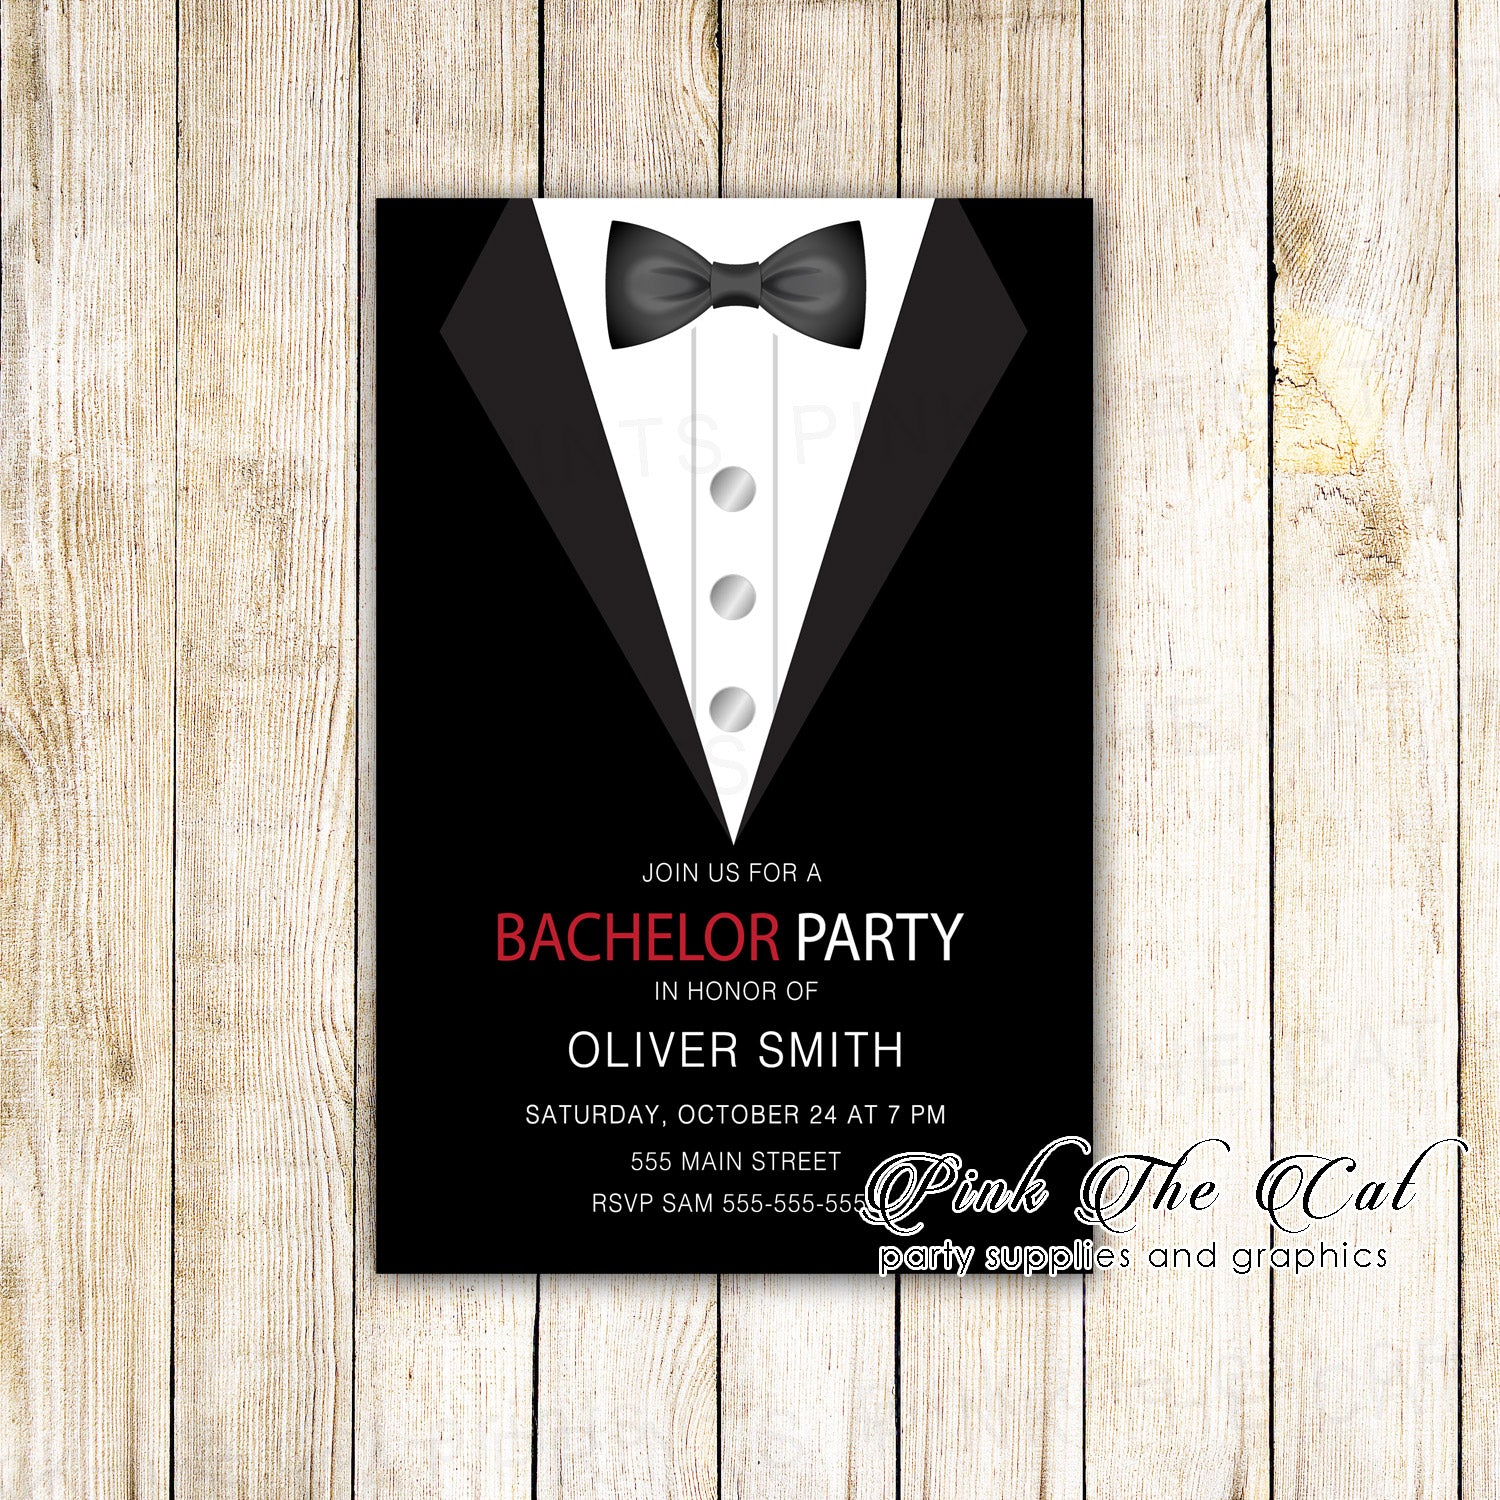 30 Bachelor invitations with enveopes black tuxedo personalized